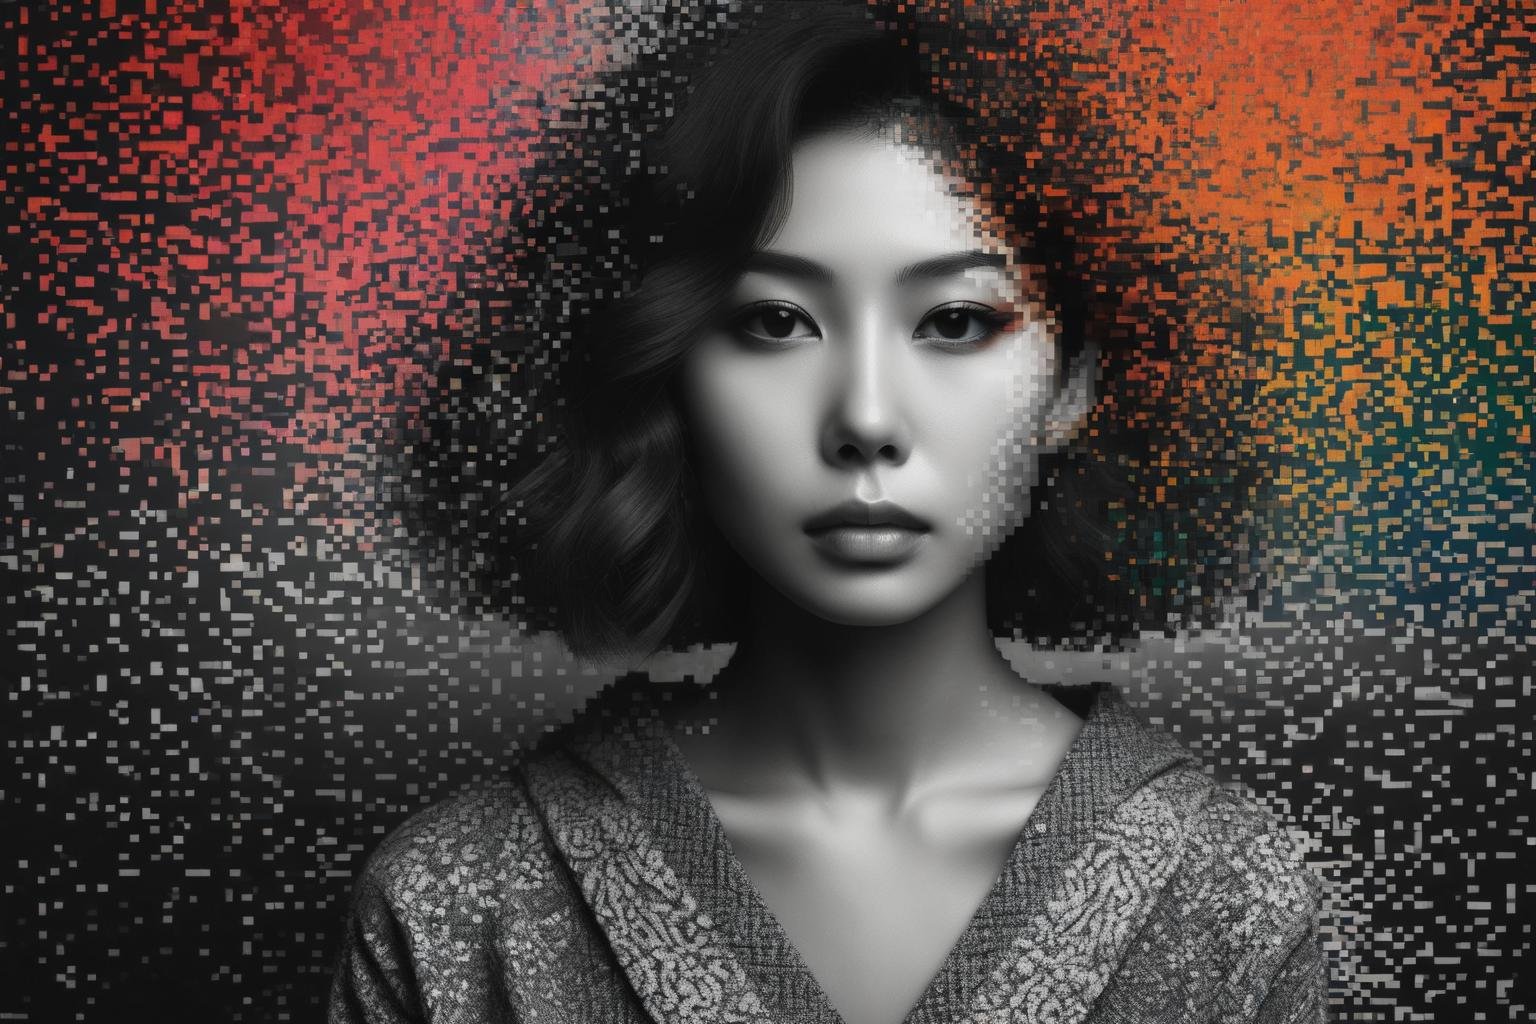 (melancholic black and white japanese girl dissolving into colorful pixels.:1.3) a color 35mm glamour close-up portrait photograph. melancholic scene. gazing at the intricate patterns of a mandala pre-winter at dusk as if shot by a famous fashion photographer using the aperture f/1.8. the mood is dark and gritty.<lora:aether_pixel_test2_231102_SDXL_LoRA_1e-6_128_dim_70_epochs:1>